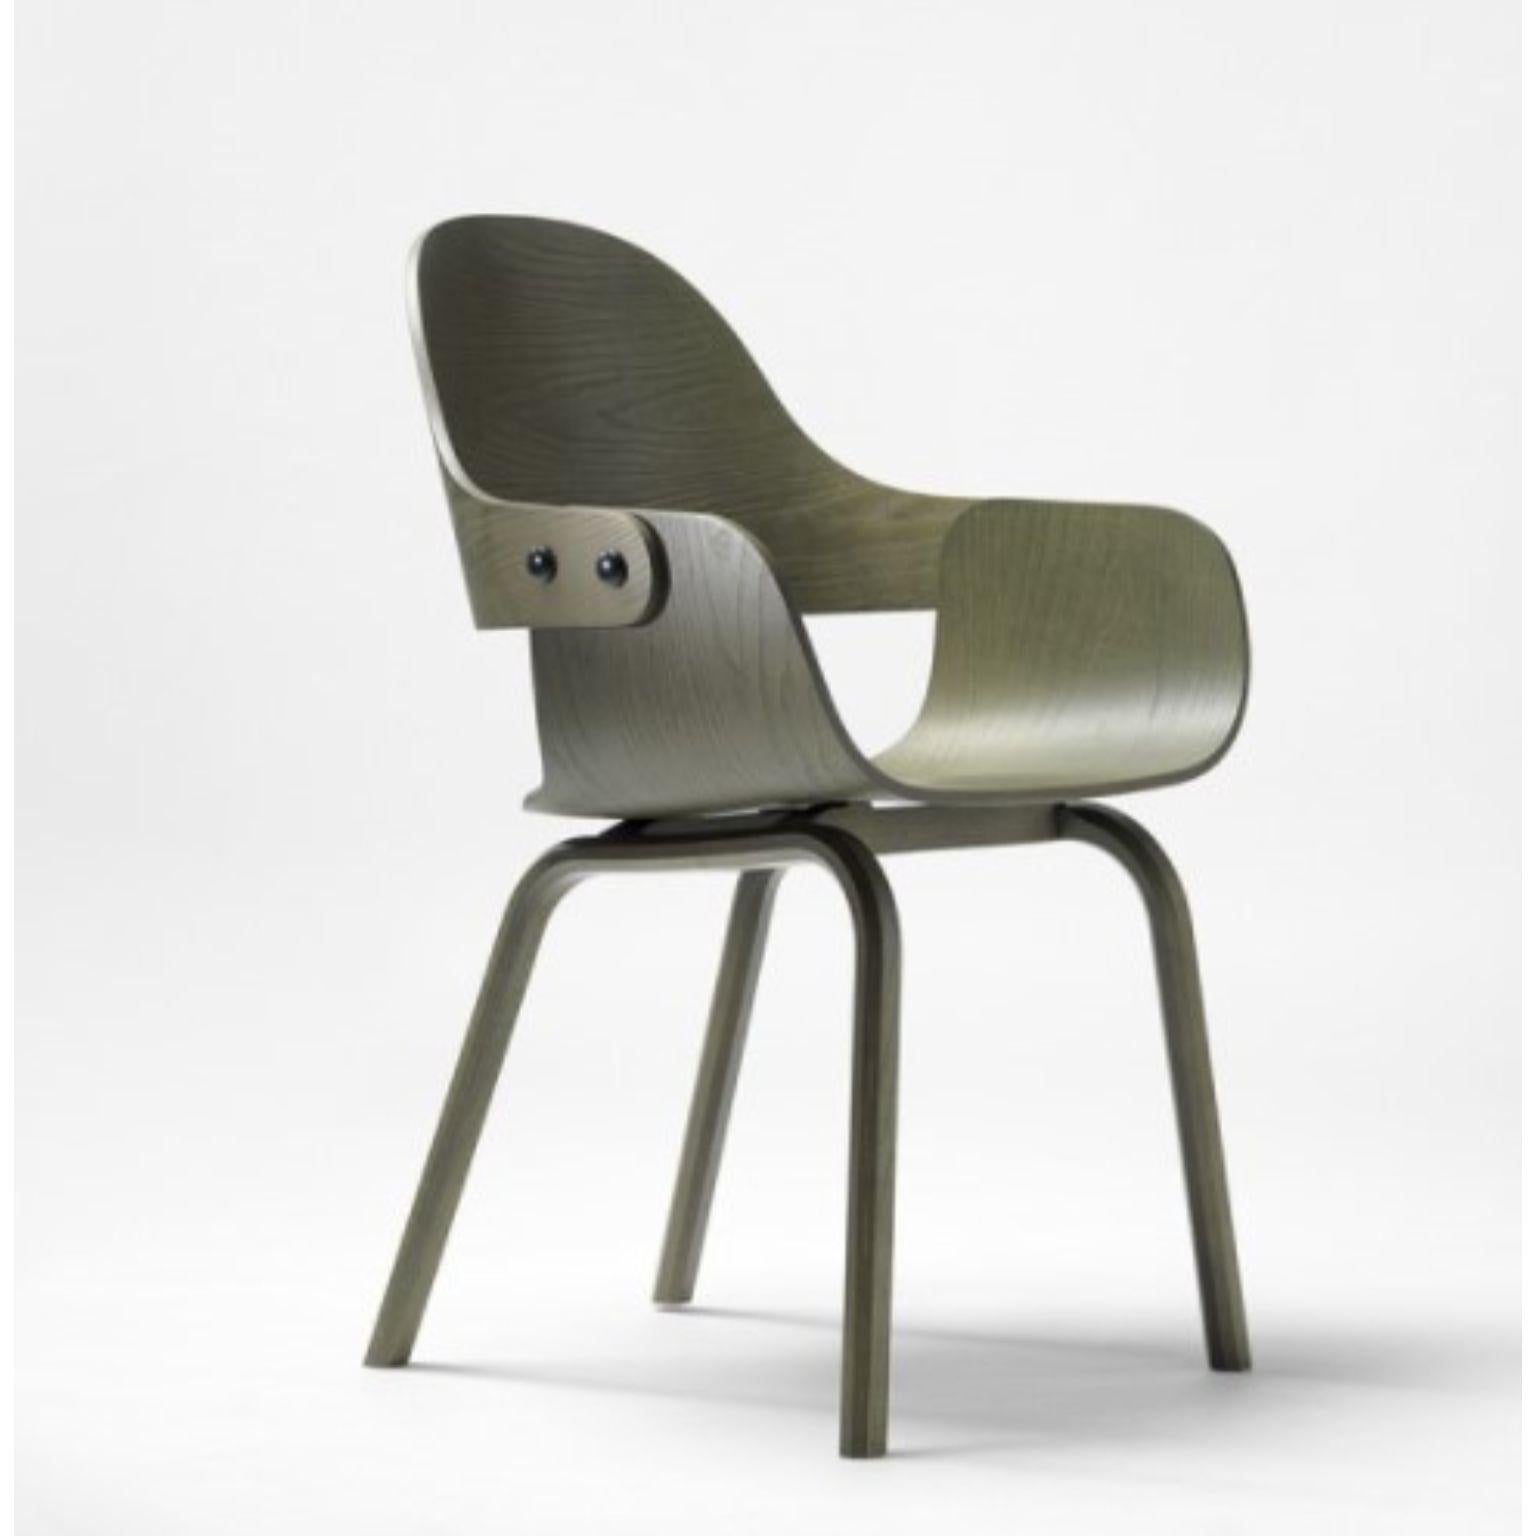 Show time nude 4 legs chair green by Jaime Hayon
Dimensions: D 55 x W 55 x H 86 cm 
Materials: Powder-coated steel or aluminum structure. Legs, seat, and backrest in plywood with exteriors in natural ash, walnut, or ash stained black. Metallic